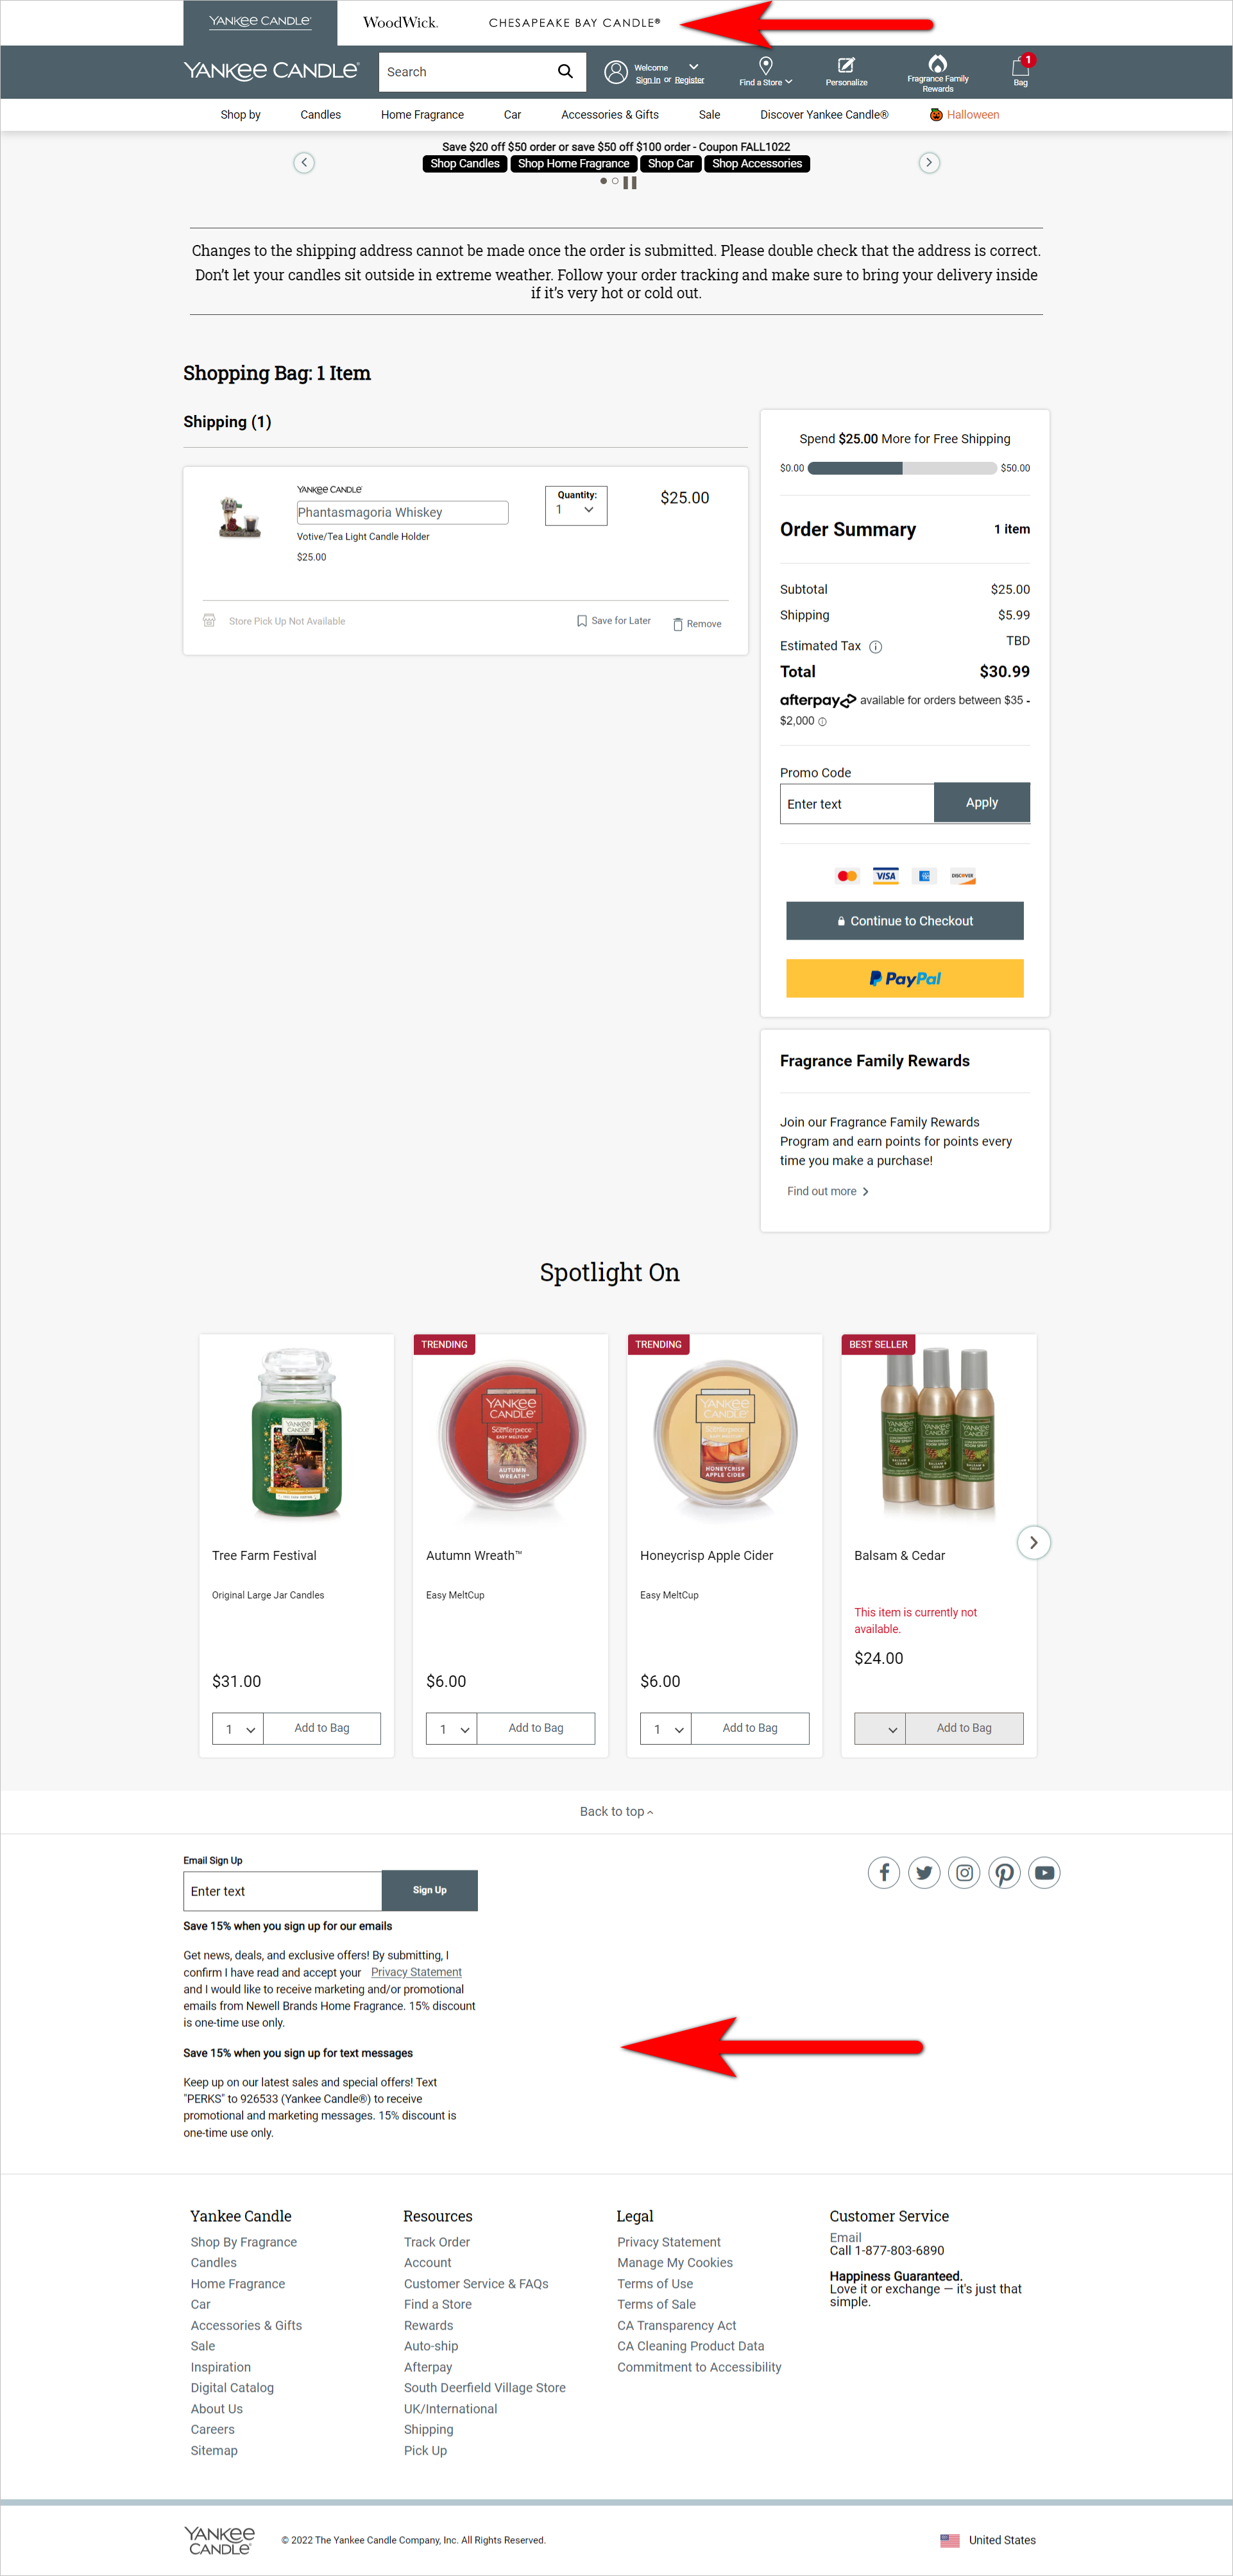 E-commerce checkout best practices – Yankee Candle’s shopping bag has several visual distractions that are removed in checkout